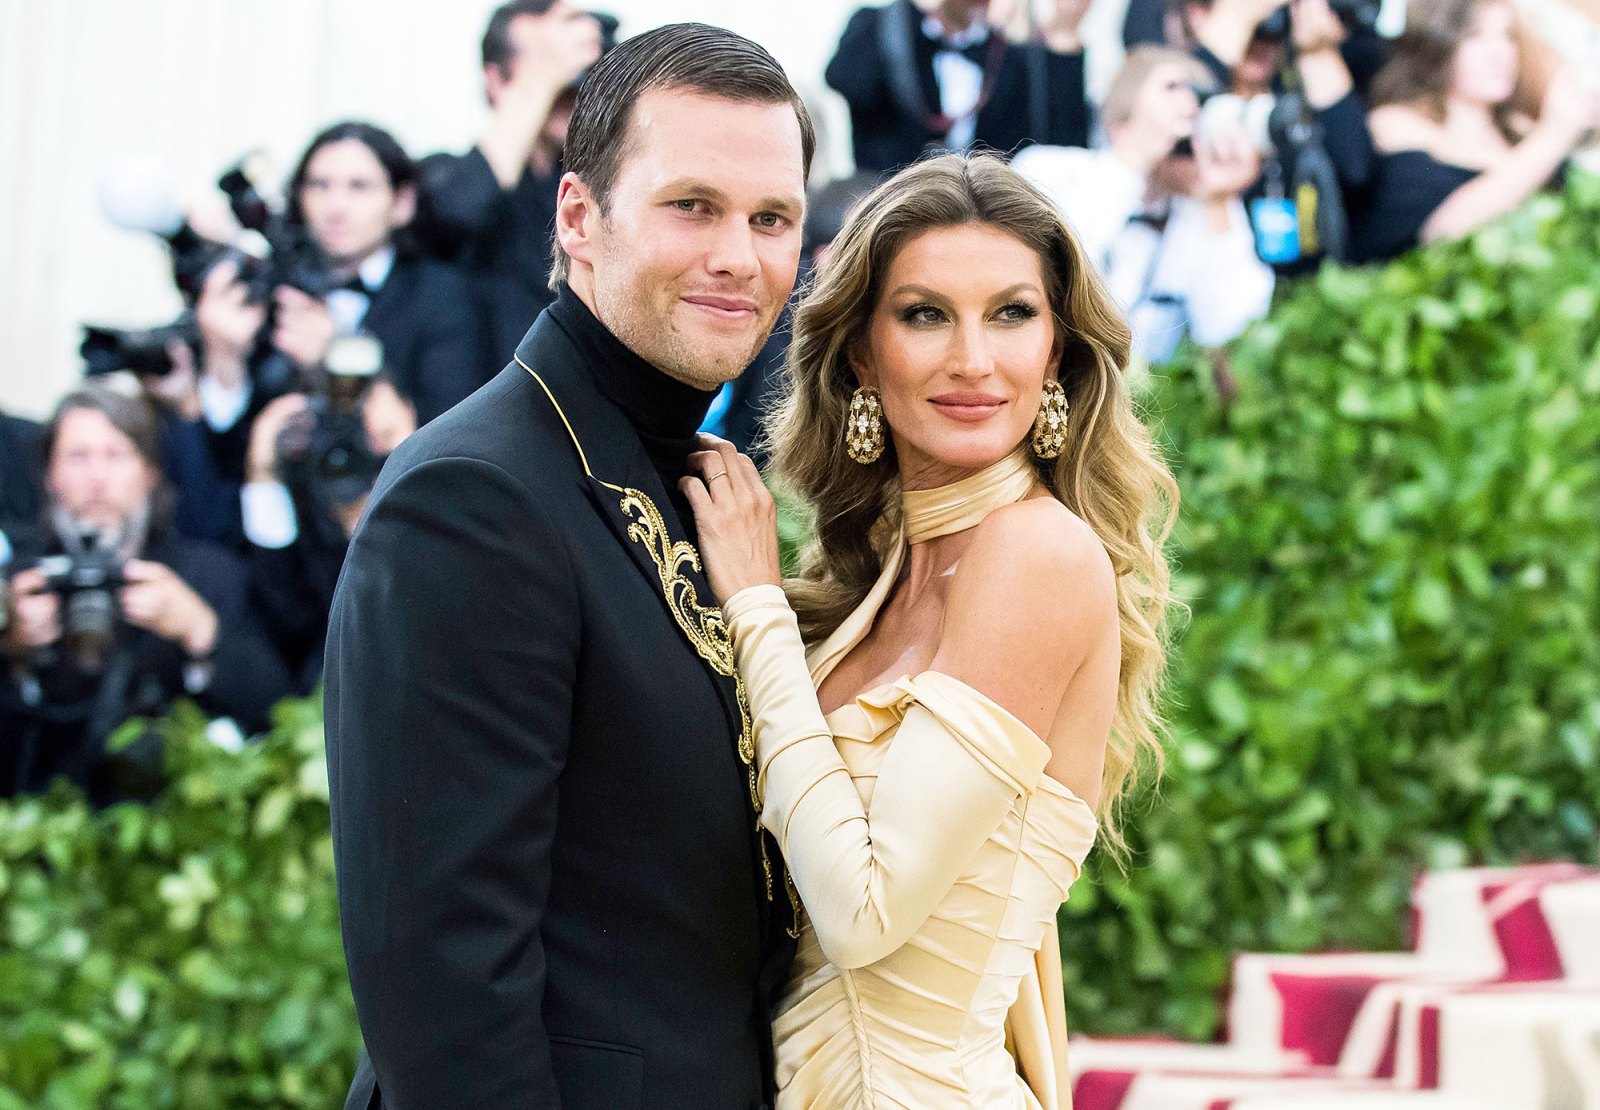 Tom Brady and Gisele Bundchen at the MET Gala Tom Brady Admits He Had to Make Changes When Wife Gisele Bundchen Wasnt Satisfied in Their Marriage